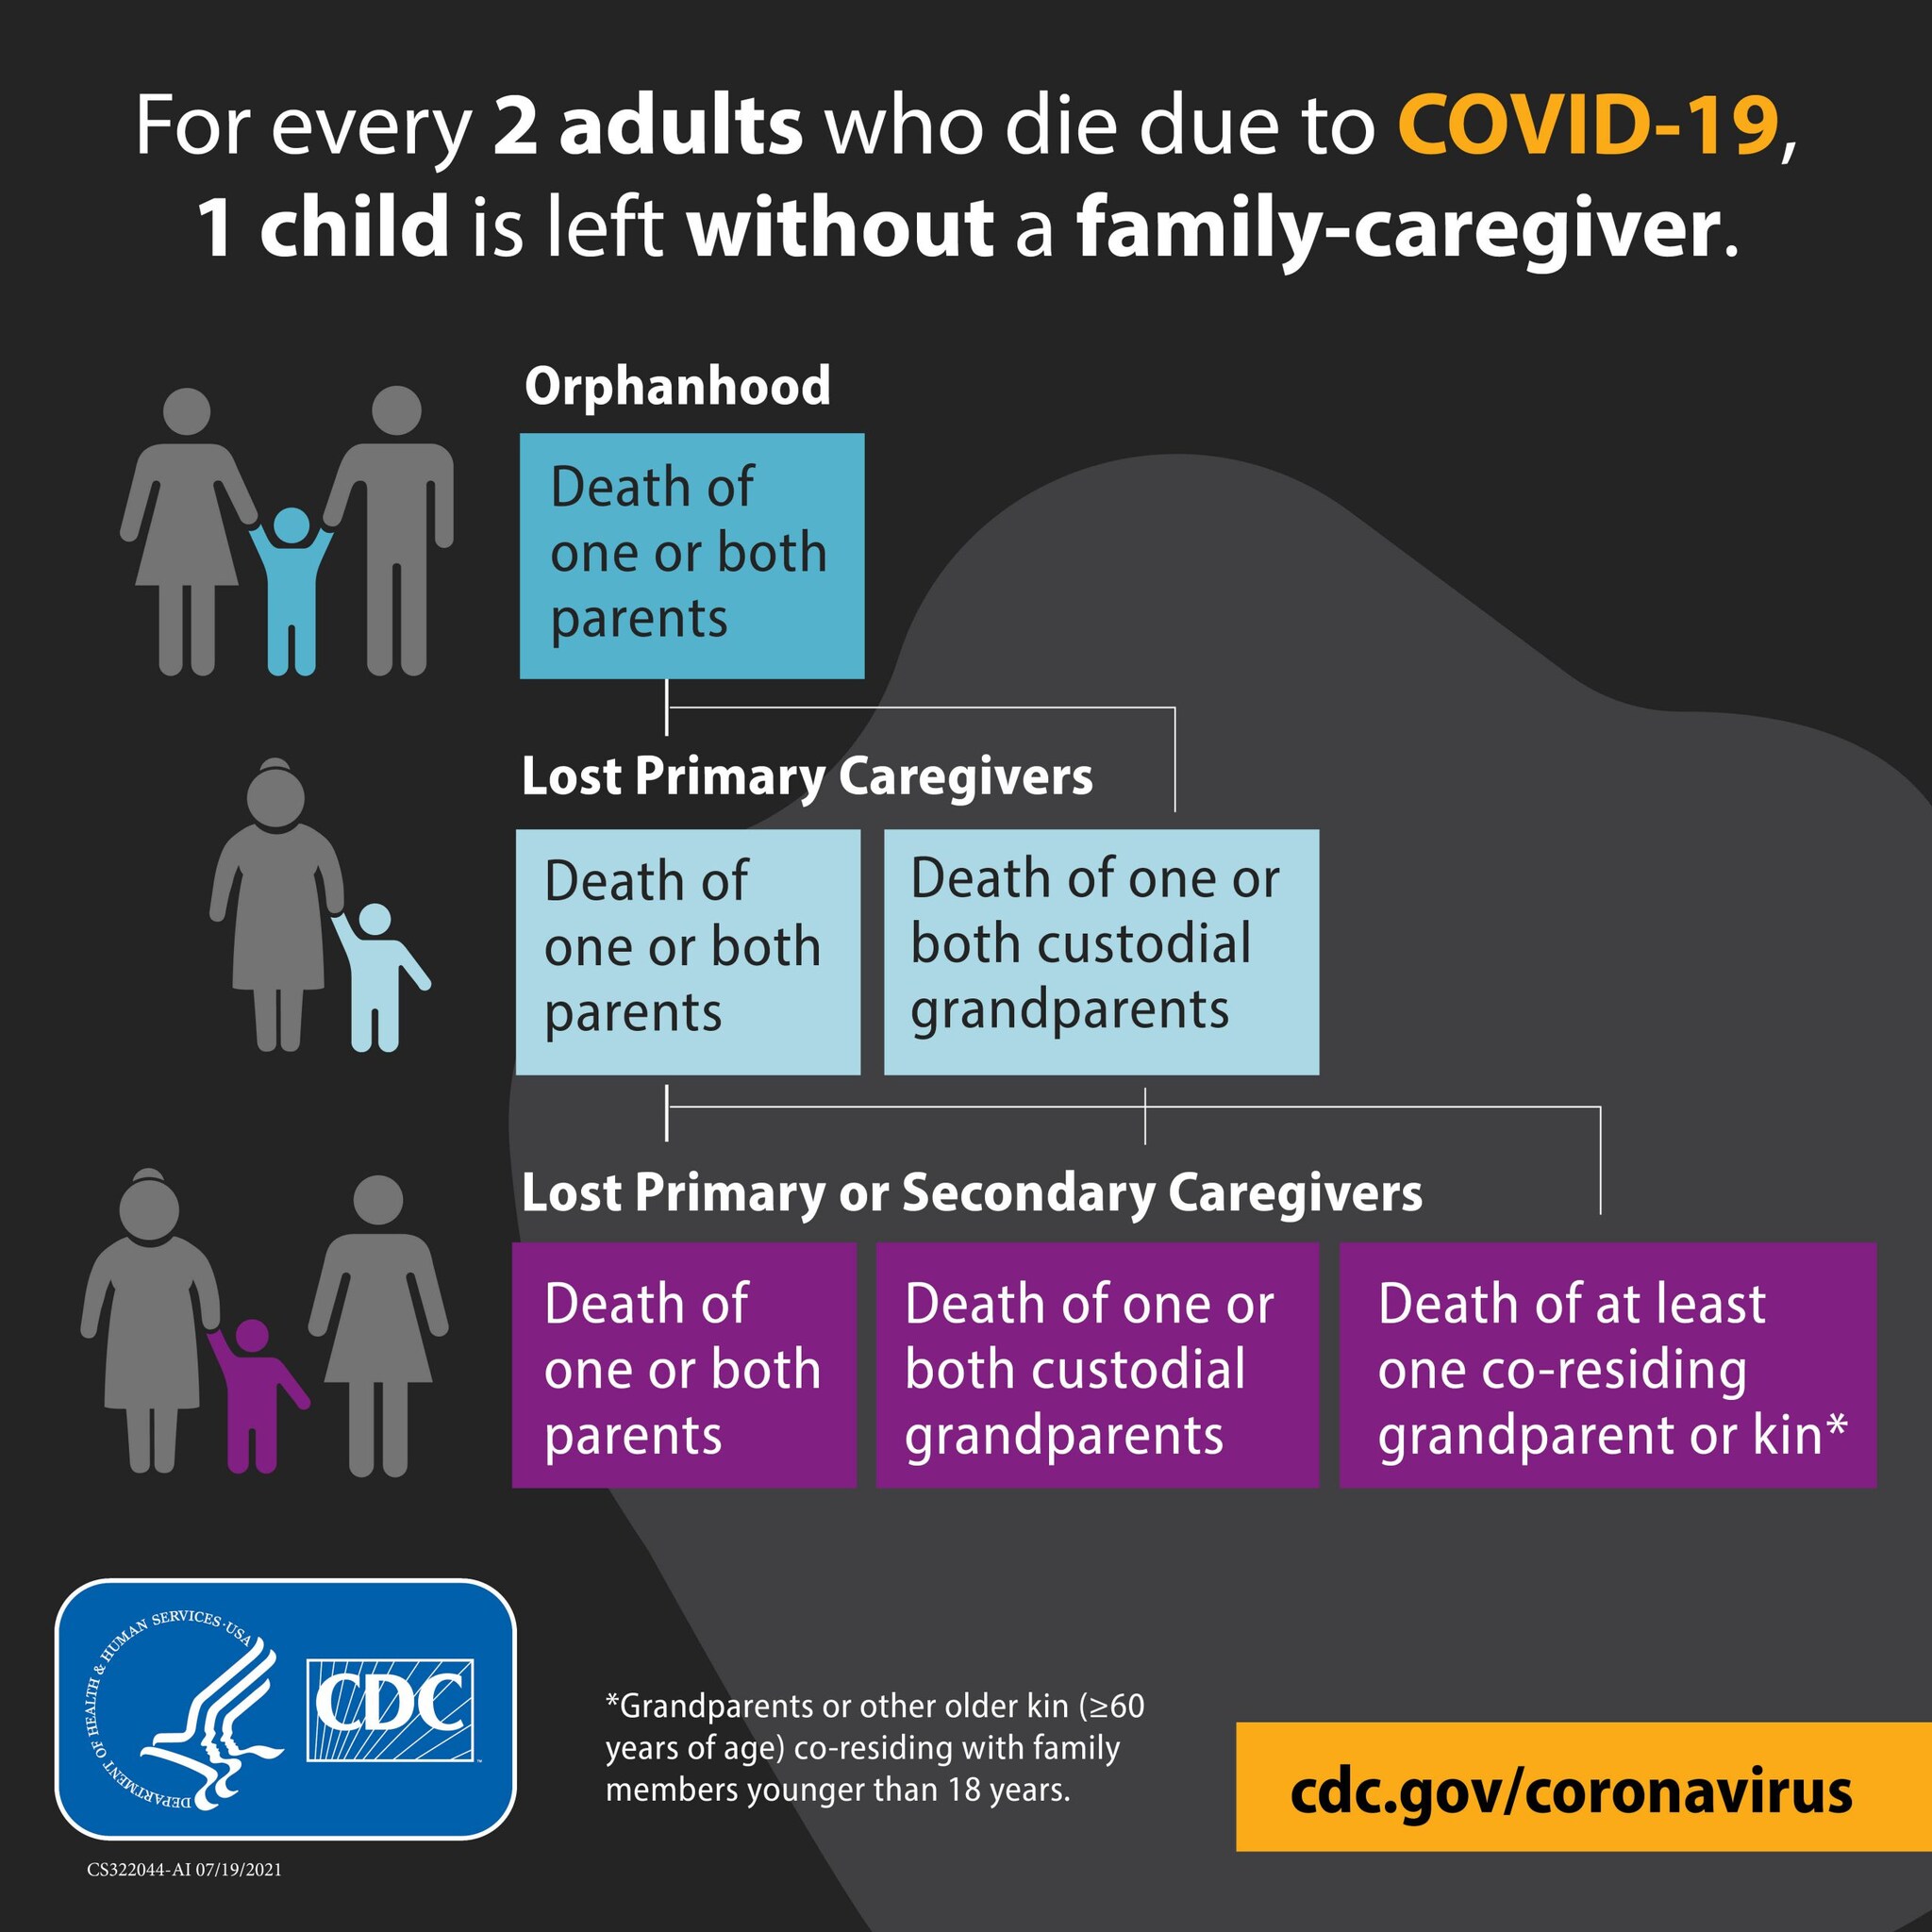 Regional minimum estimates of numbers of children who lost a family-caregiver* due to COVID-19.